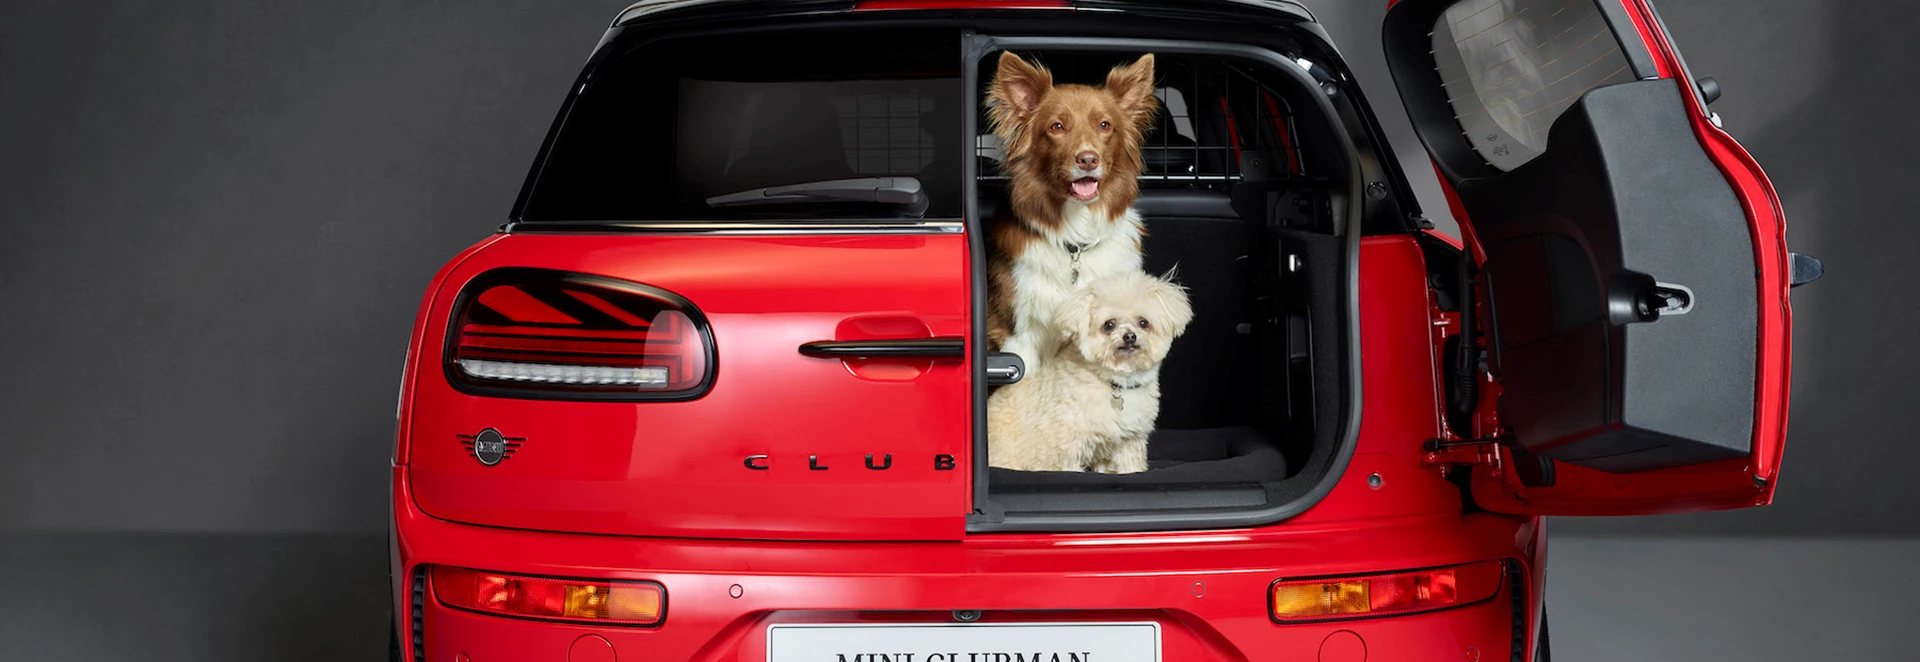 Best cars for dog owners 2021 (1) 